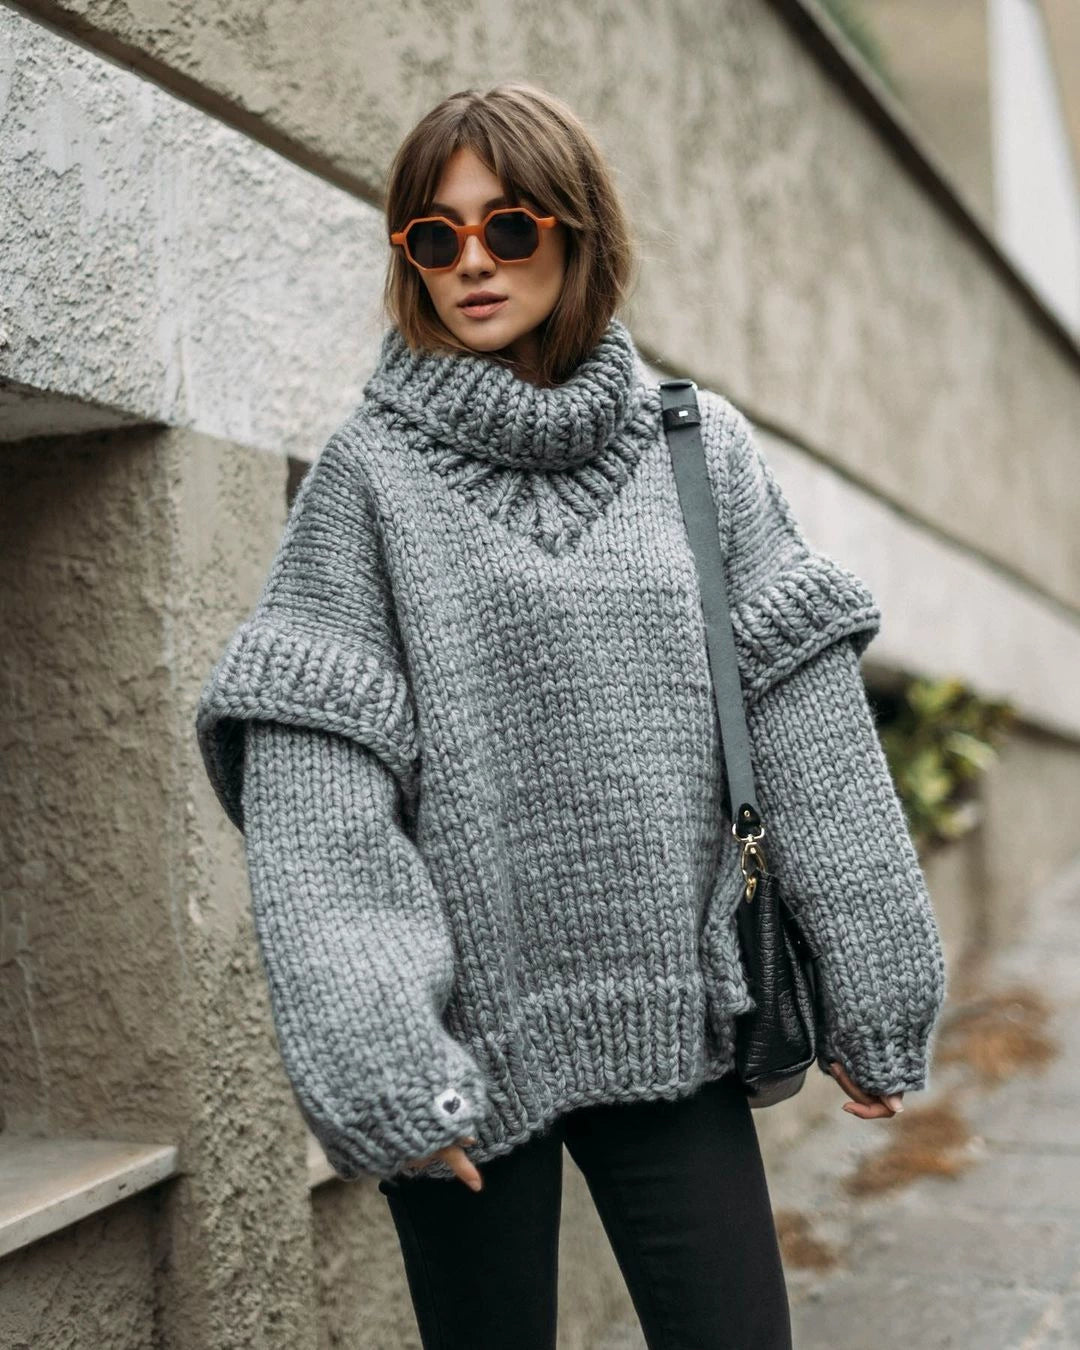 LaPose Fashion - Carolla Knitted Oversize Sweater - Clean Girl, Cozy Girl, Knitted Clothes, Knitted Tops, Long Sleeve Tops, Loose Sweaters, Oversize Swe